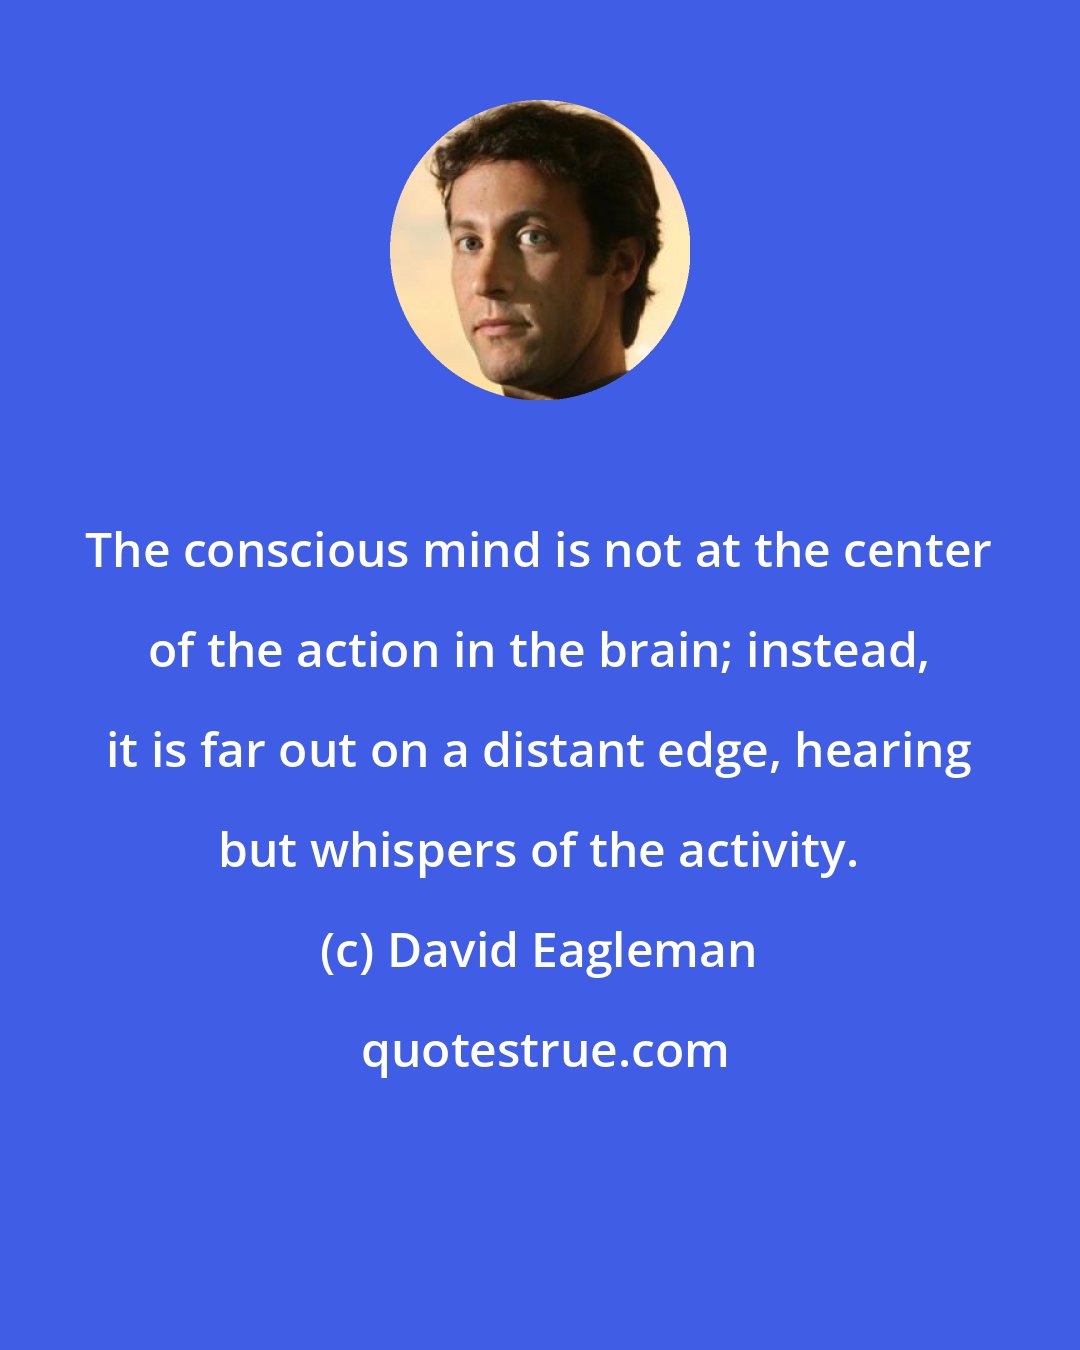 David Eagleman: The conscious mind is not at the center of the action in the brain; instead, it is far out on a distant edge, hearing but whispers of the activity.